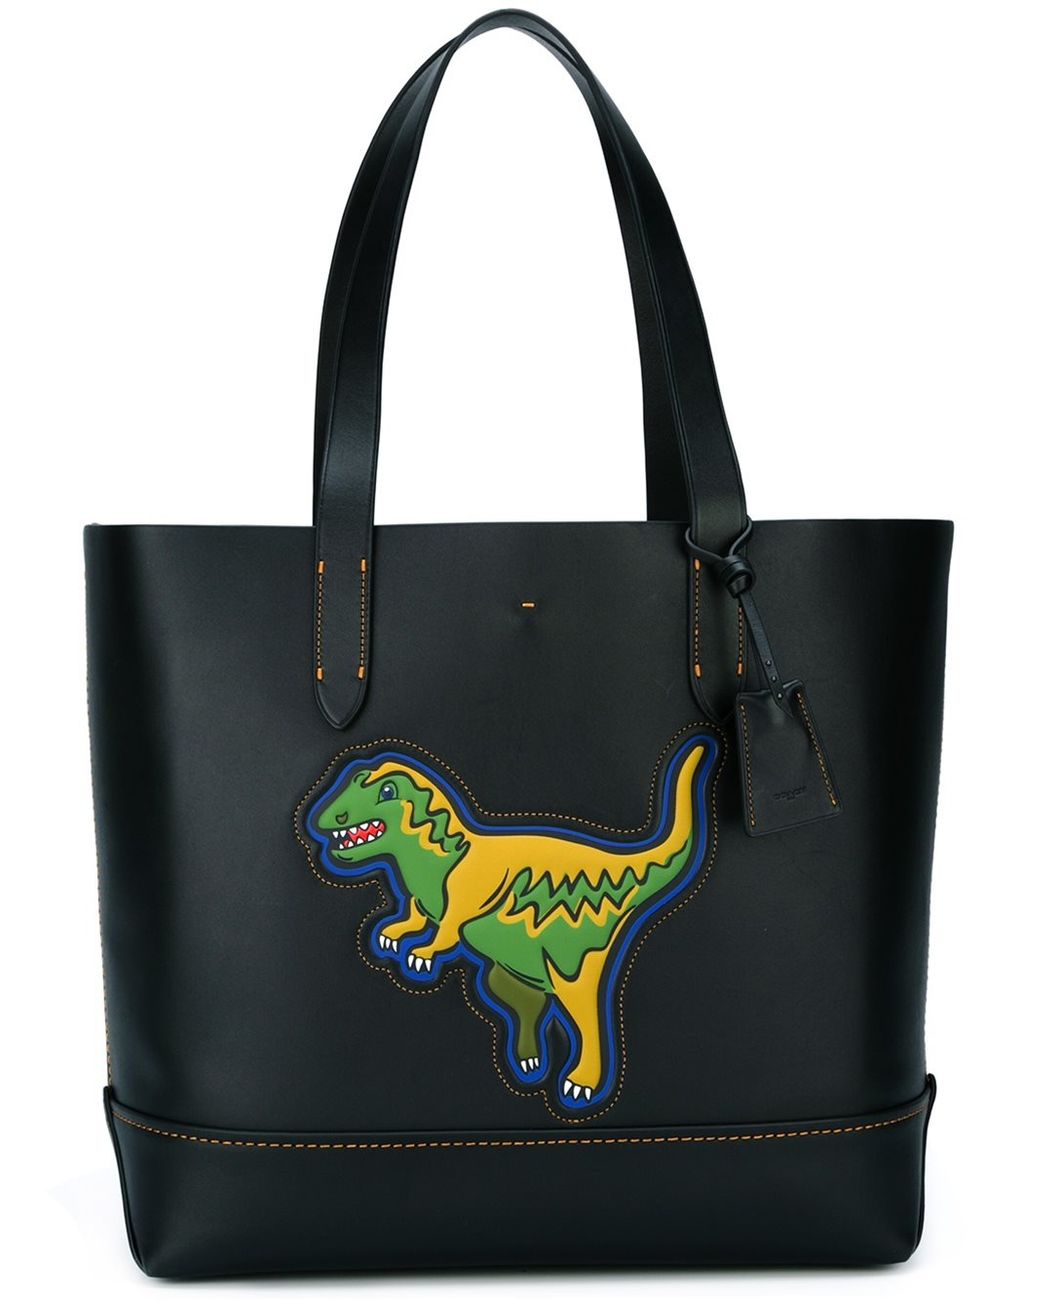 COACH Dinosaur Patch Tote Bag in Black | Lyst